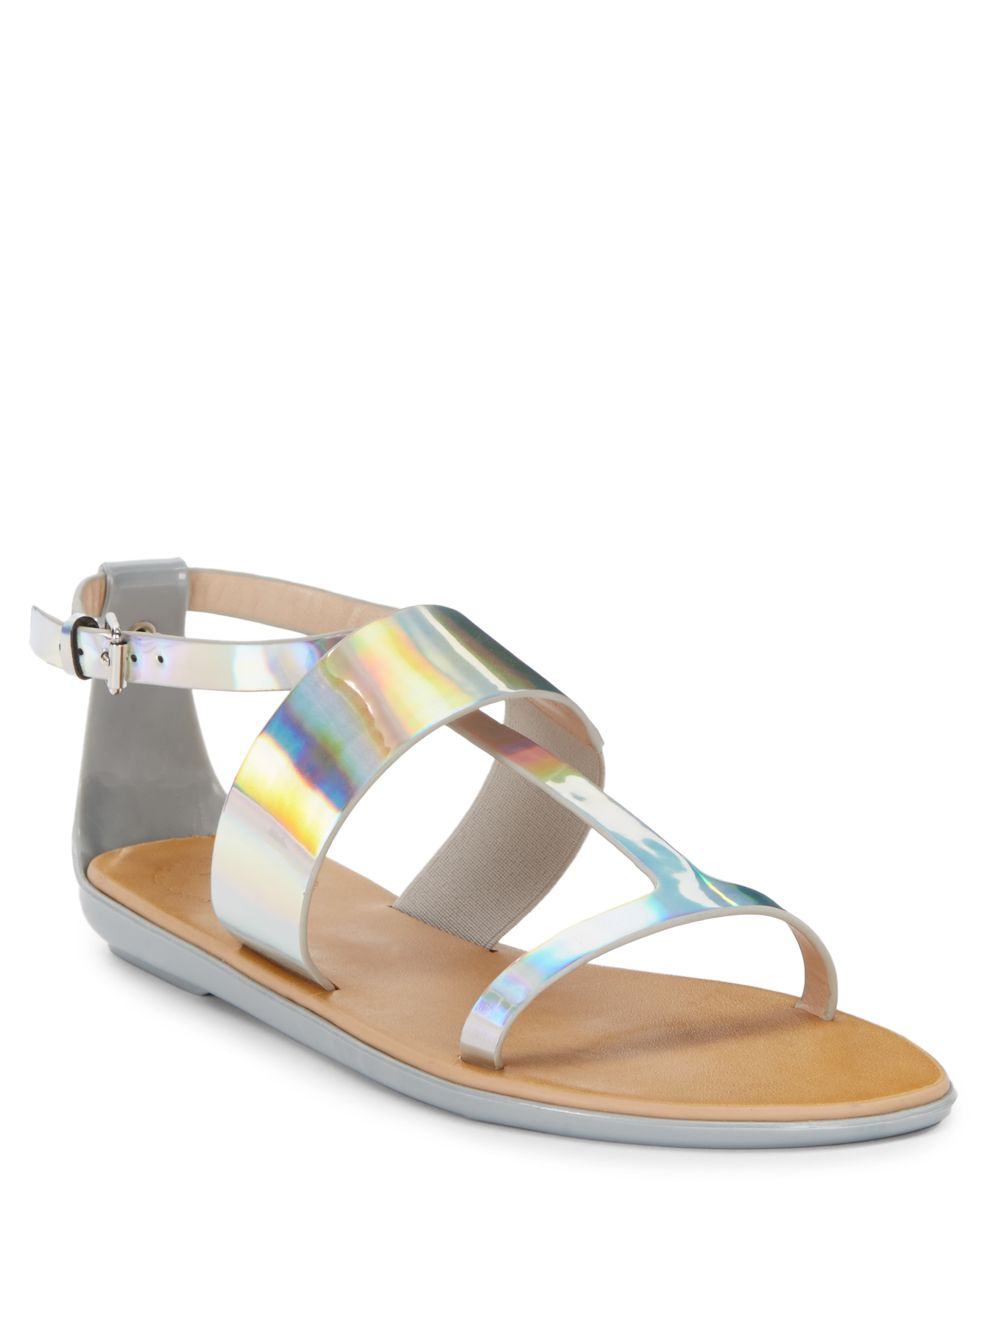 French Connection Tamara Iridescent Flat Sandals in Silver | Lyst